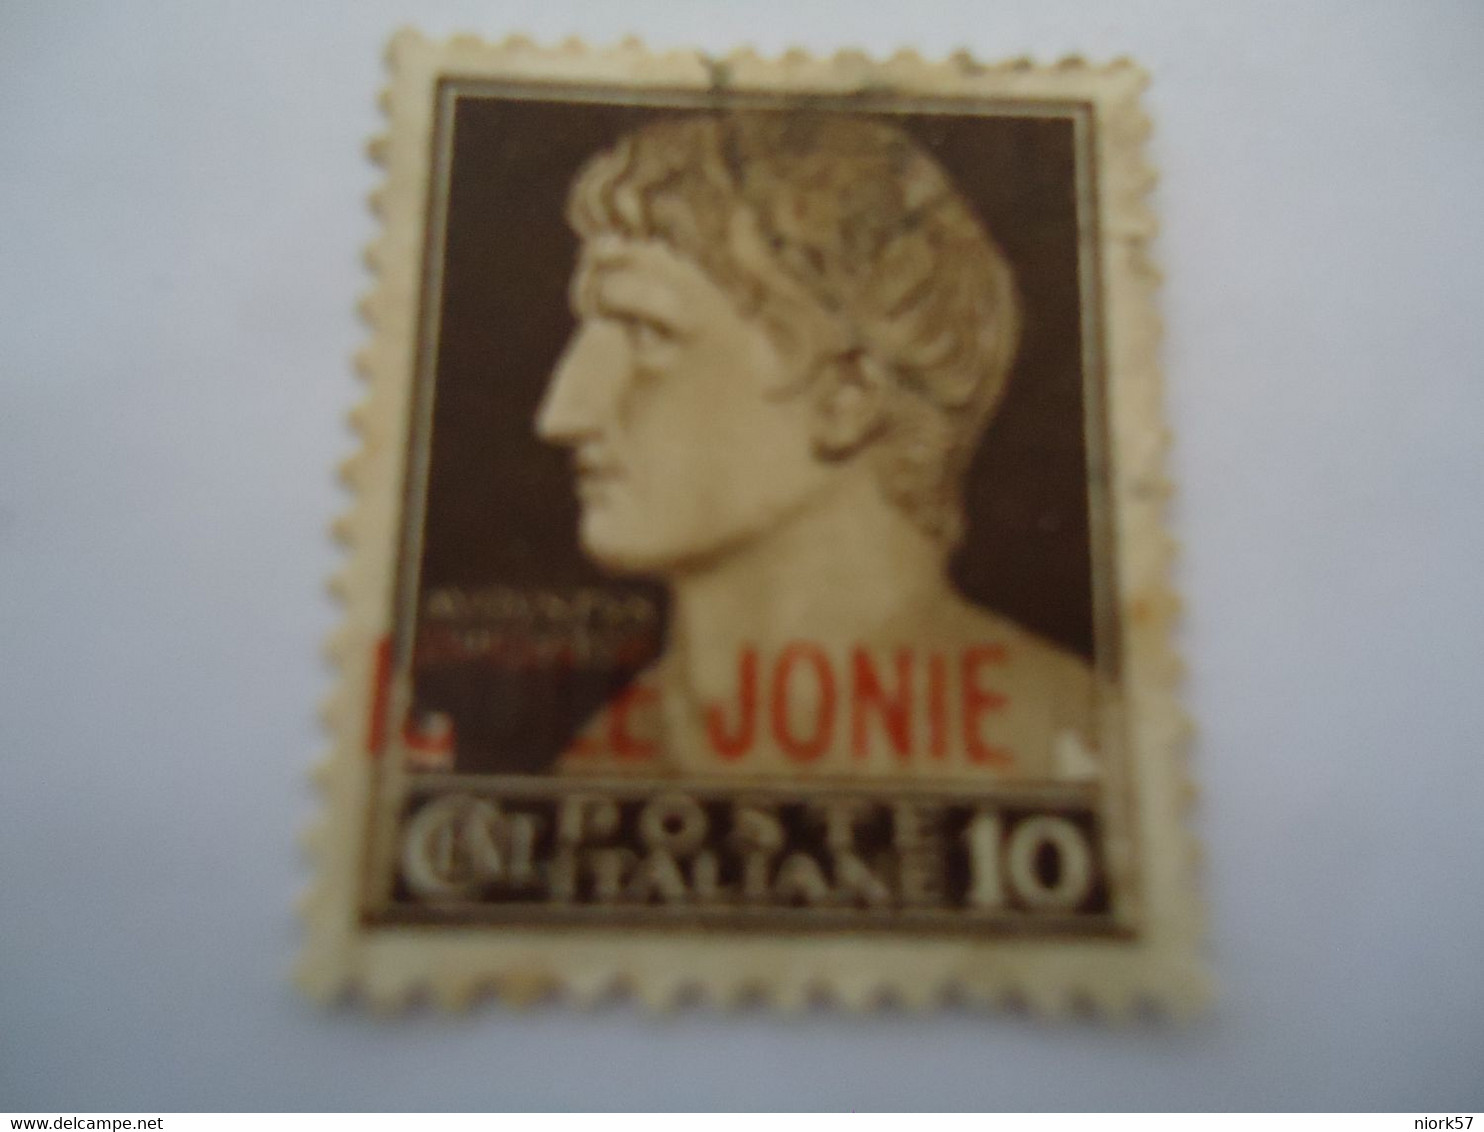 GREECE  USED ITALY   STAMPS JONIE - Iles Ioniques